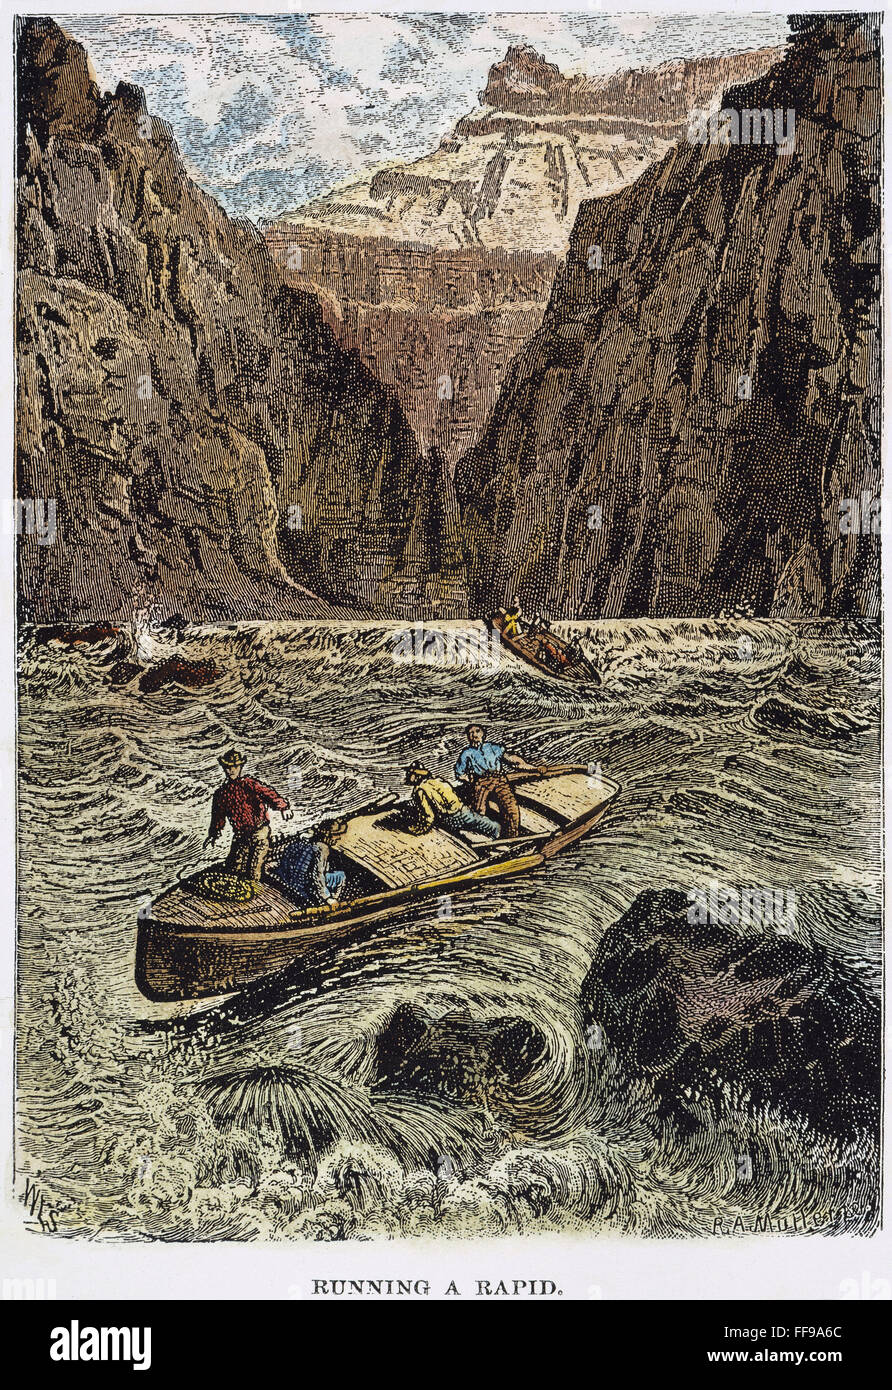 JOHN WESLEY POWELL /n(1834-1902) and his expedition running the rapids of the Colorado River in the Grand Canyon in August, 1869: wood engraving, 19th century. Stock Photo